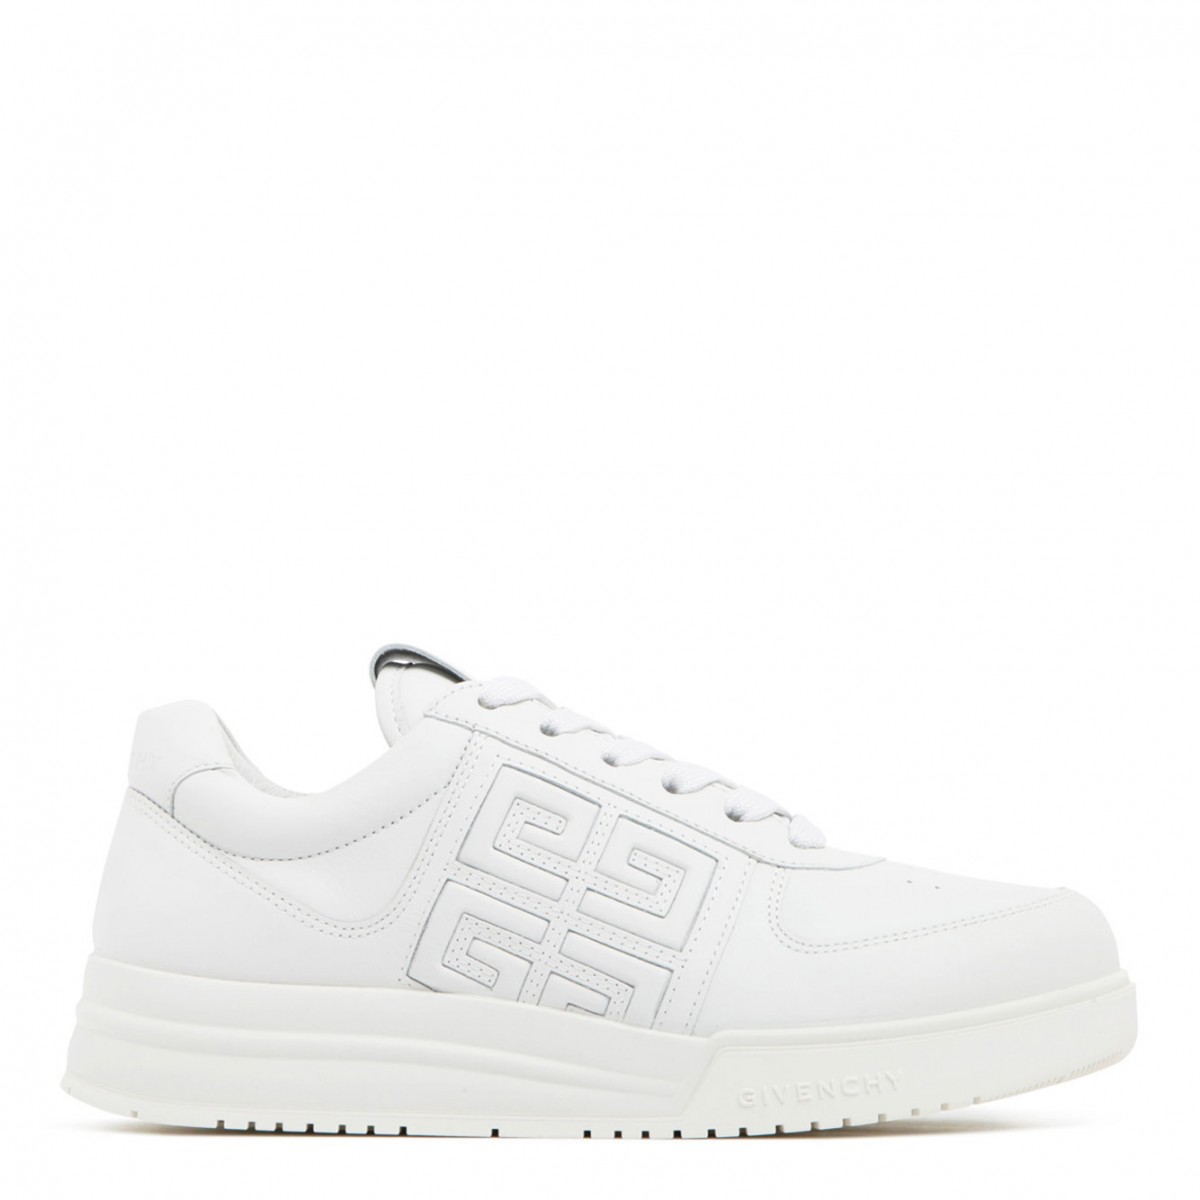 Givenchy White Calf Leather 4G Low Top Sneakers.